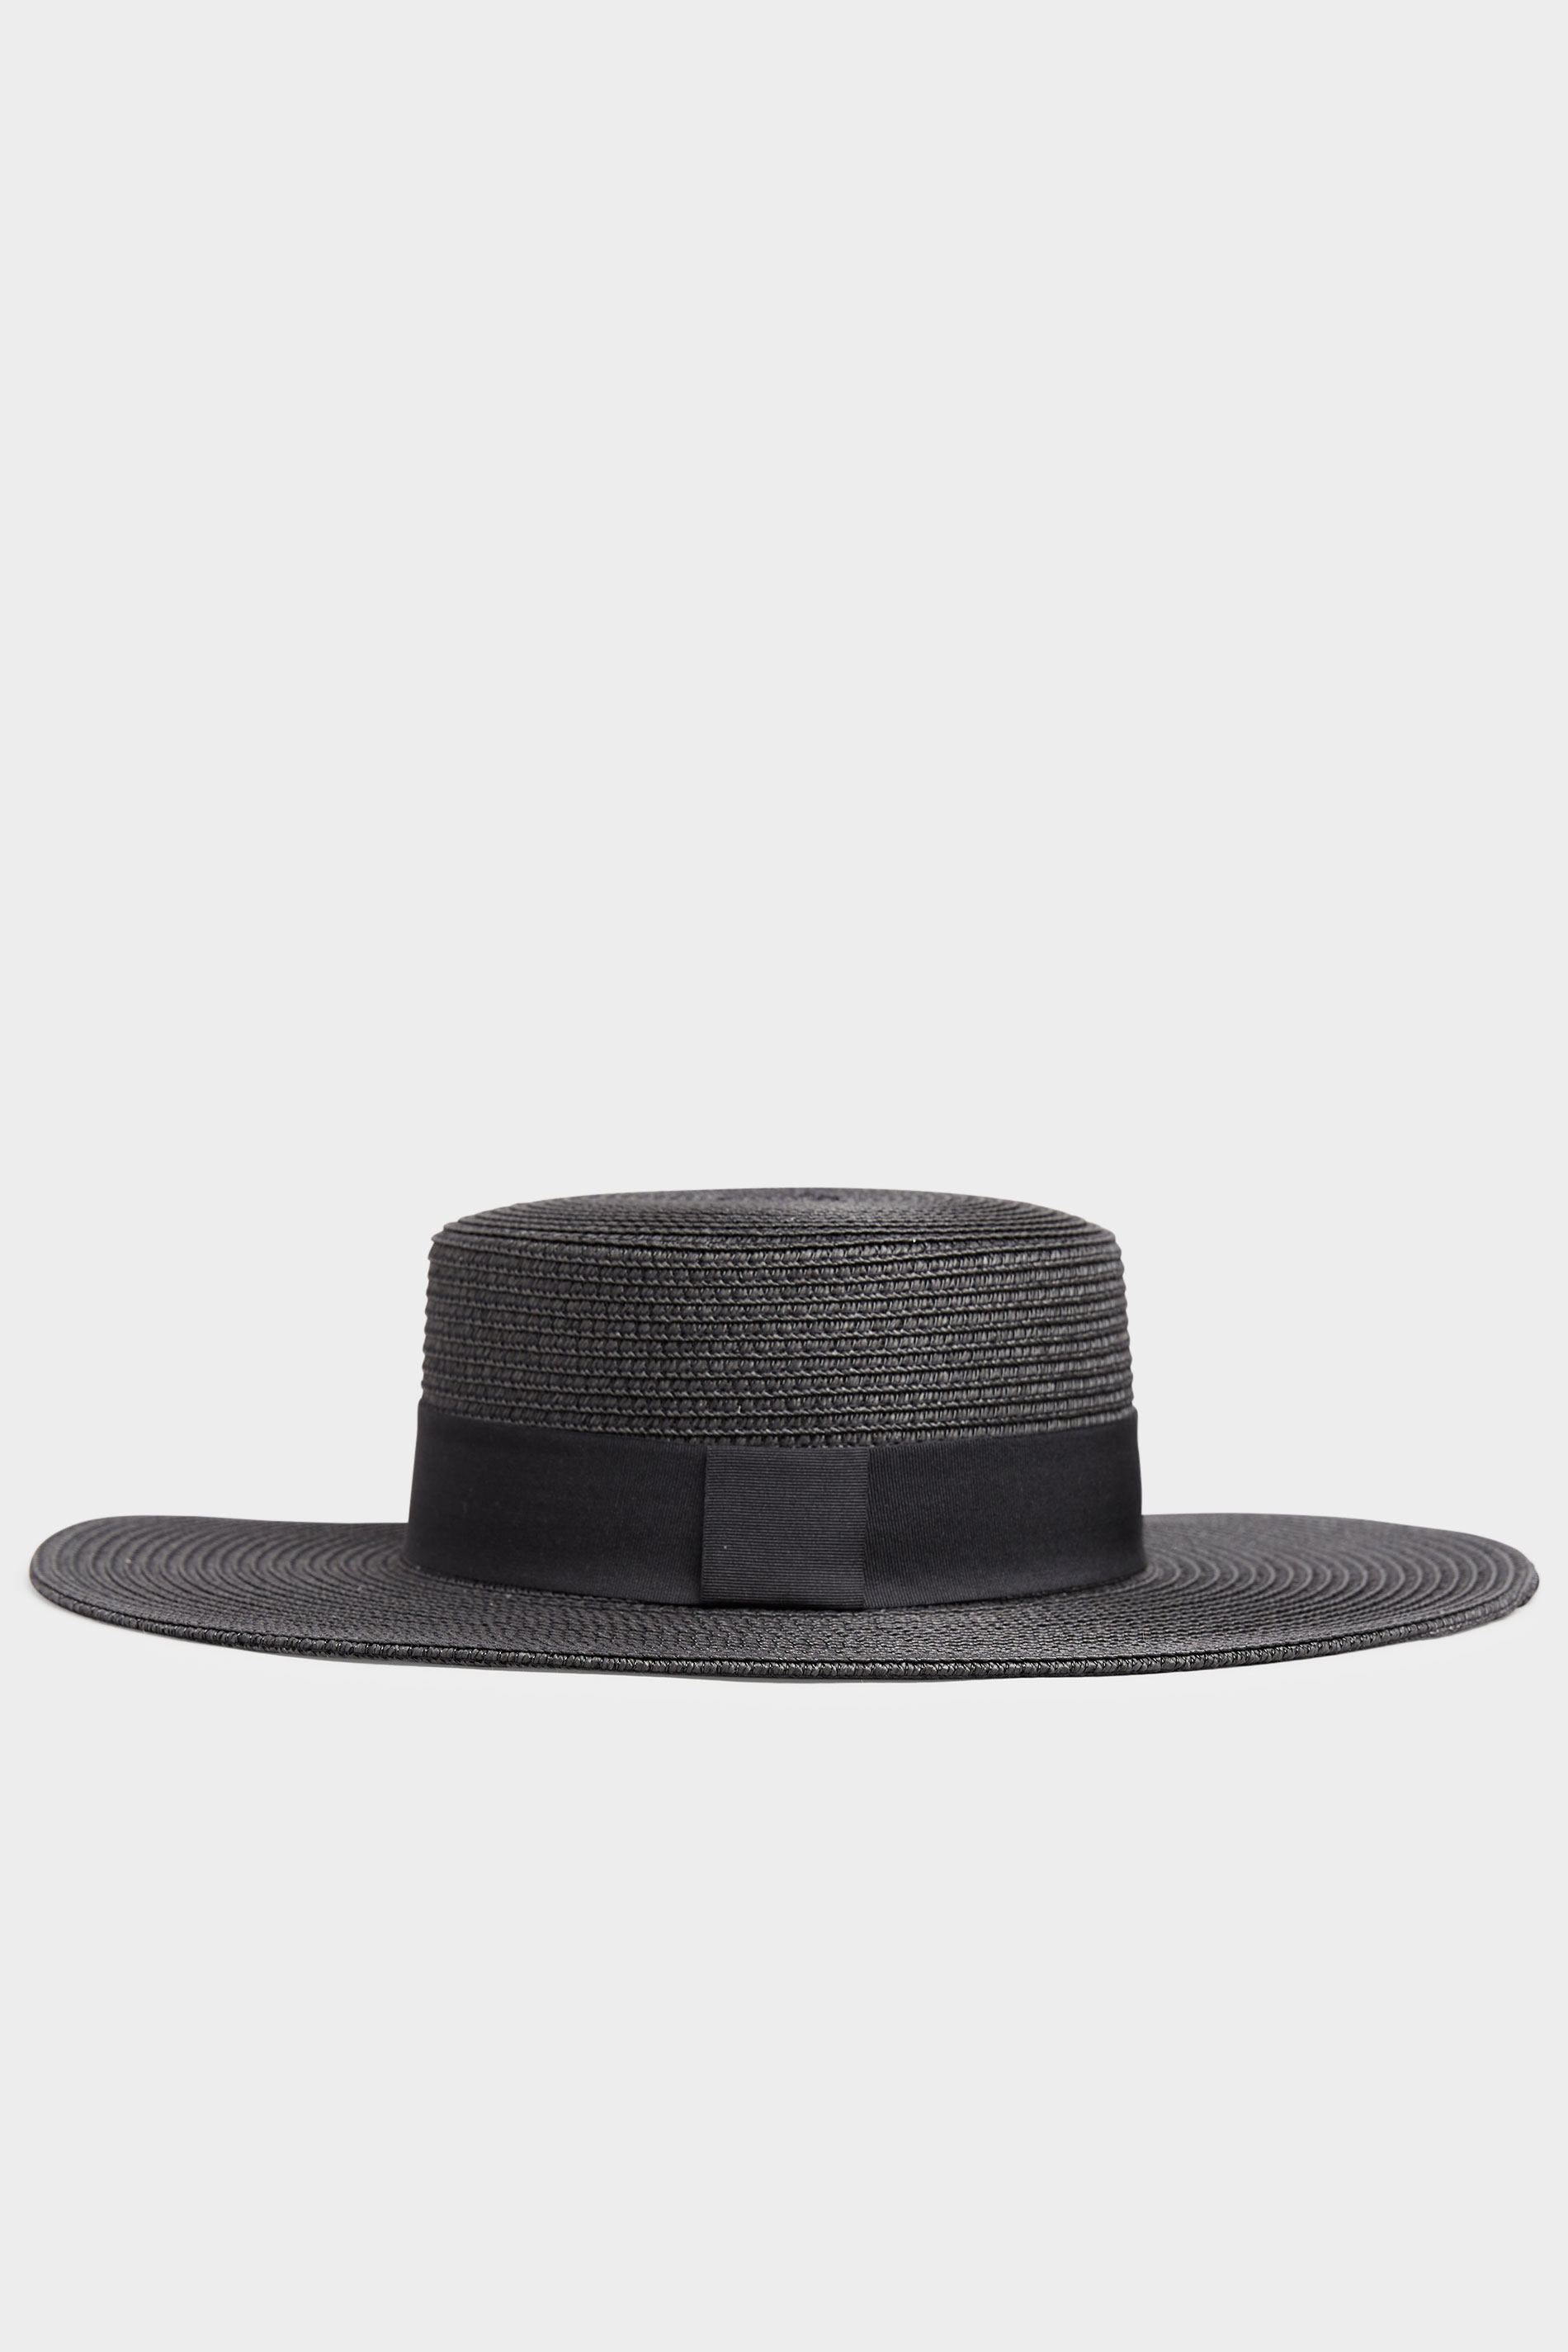 Black Straw Wide Brim Boater Hat | Yours Clothing 2